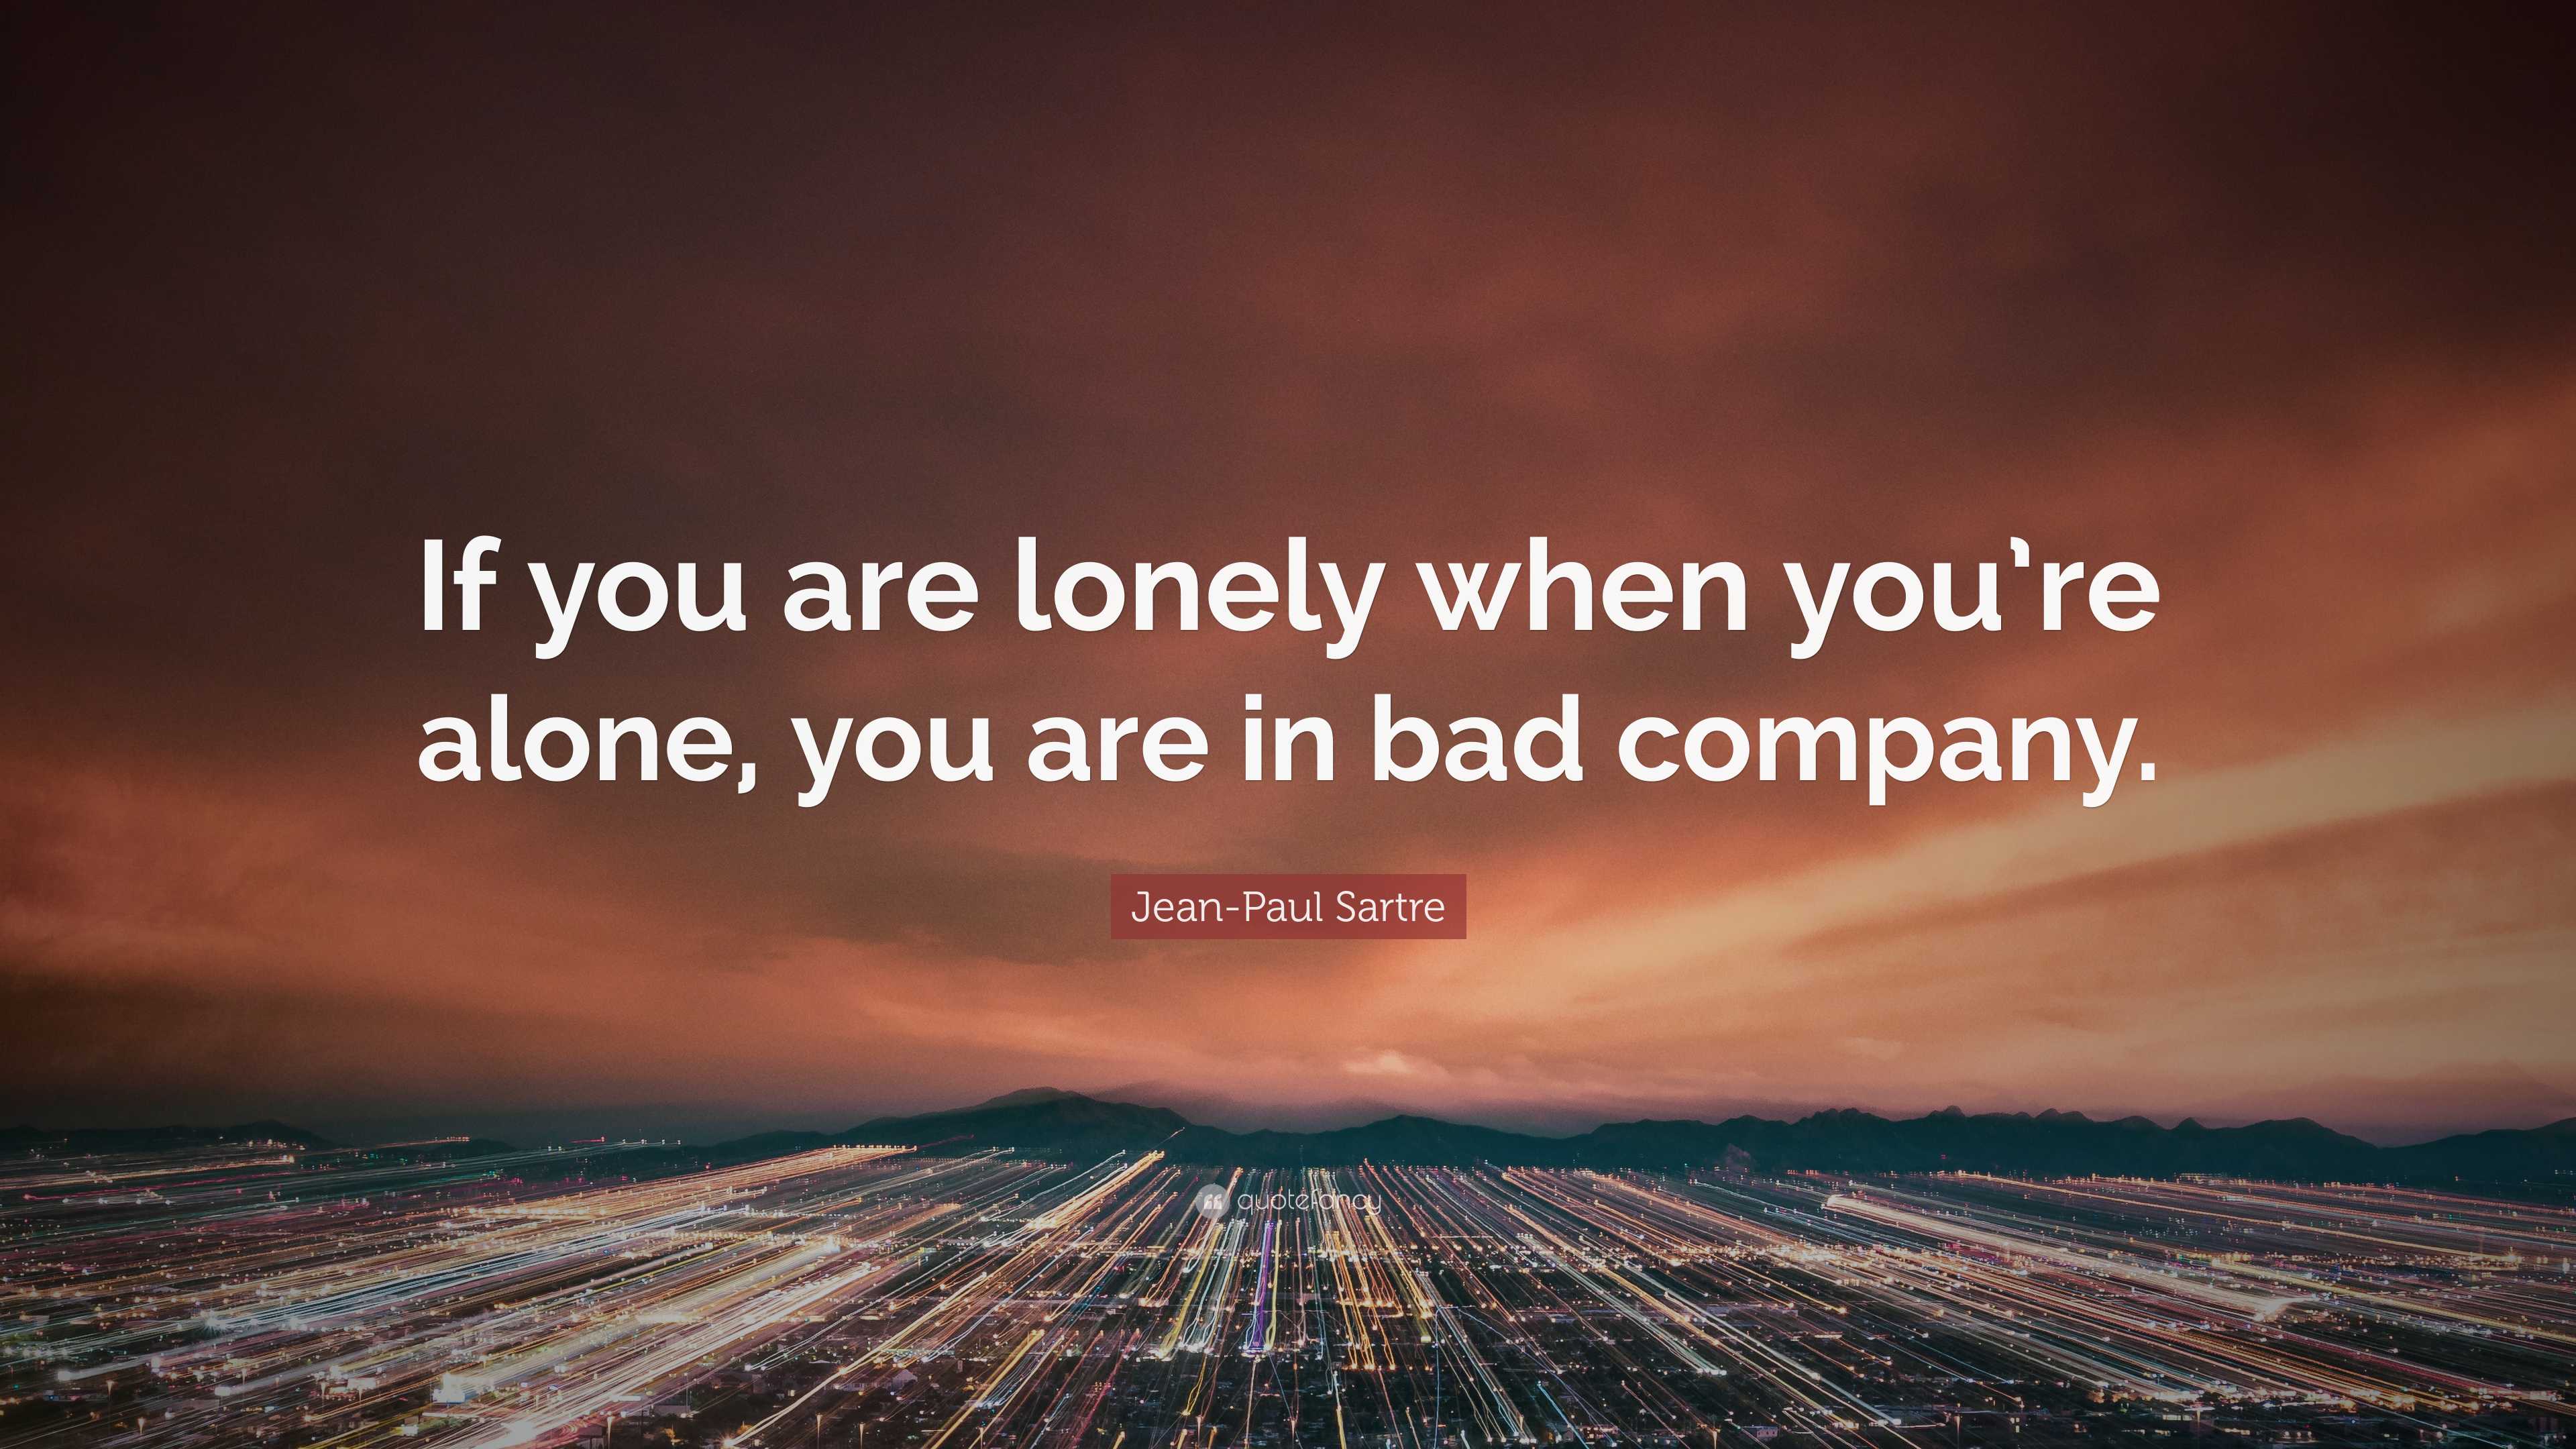 Jean-Paul Sartre Quote: “If you are lonely when you’re alone, you are ...